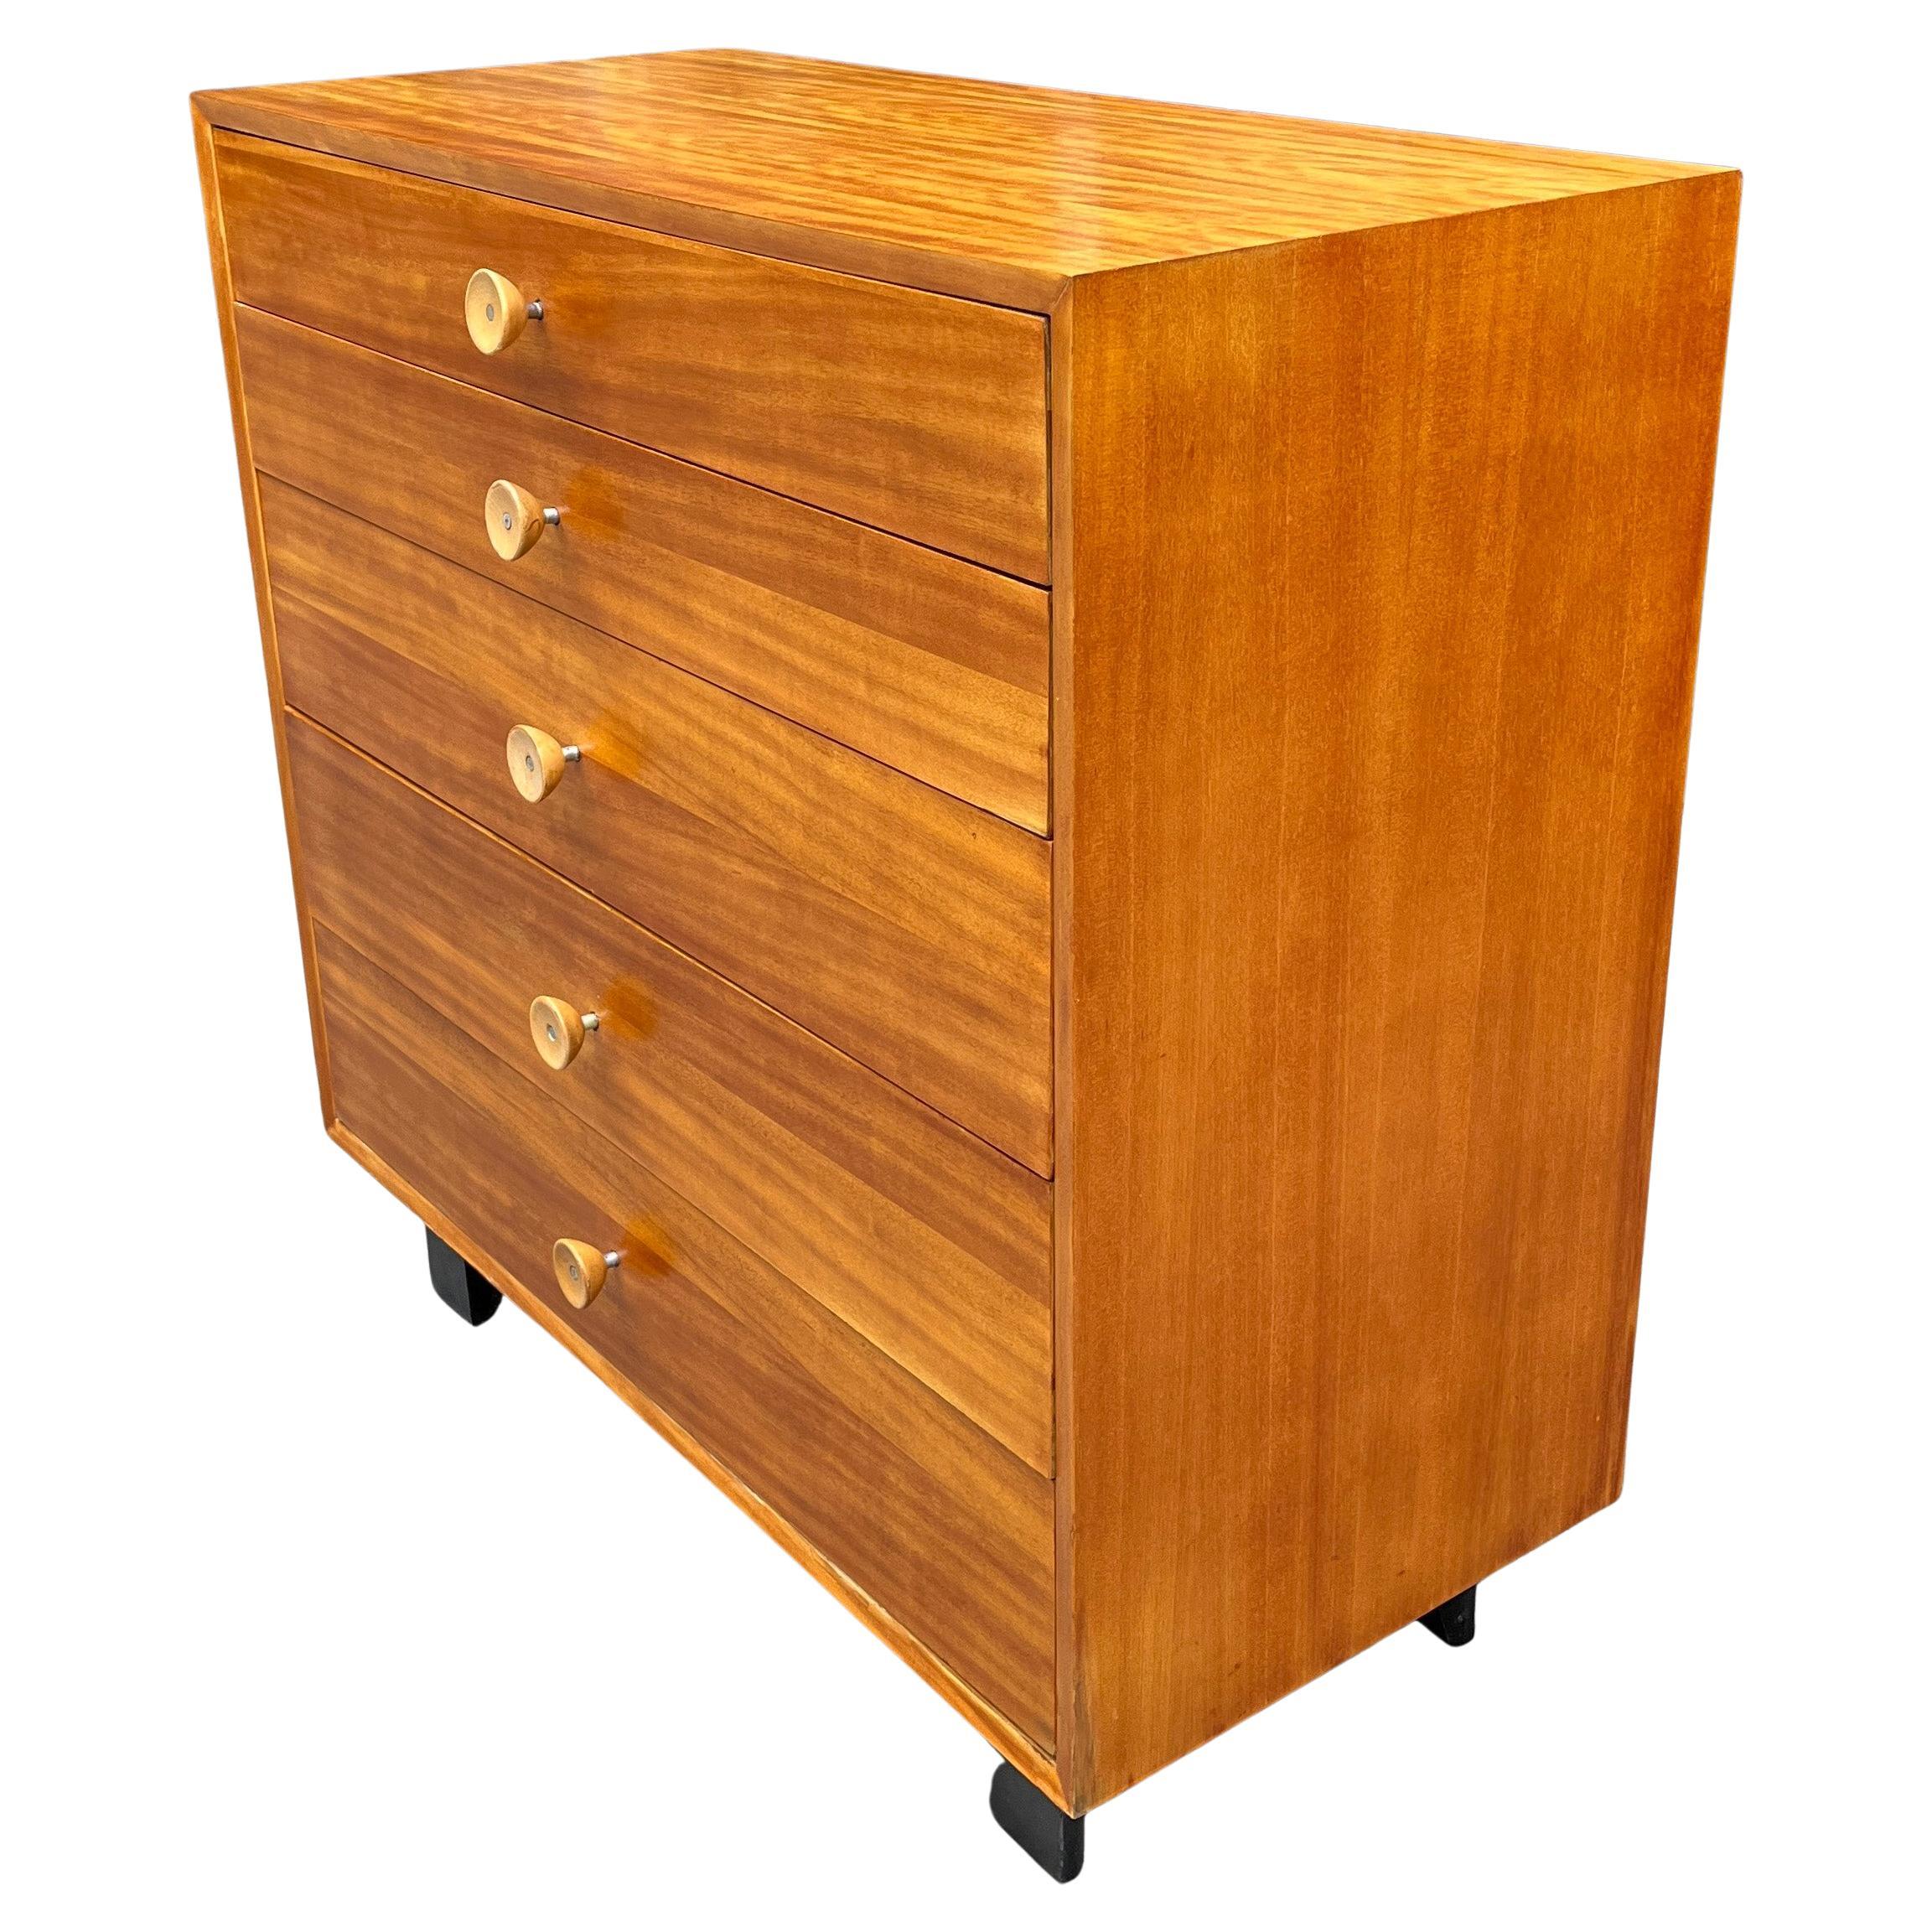 Basic Cabinet Series 4620 BCS
Gorgeous Mid-Century Modern highboy dresser designed by George Nelson for Herman Miller. The dresser features five graduated drawers. Part of Herman Miller's collection of modular basic storage components. The chest has